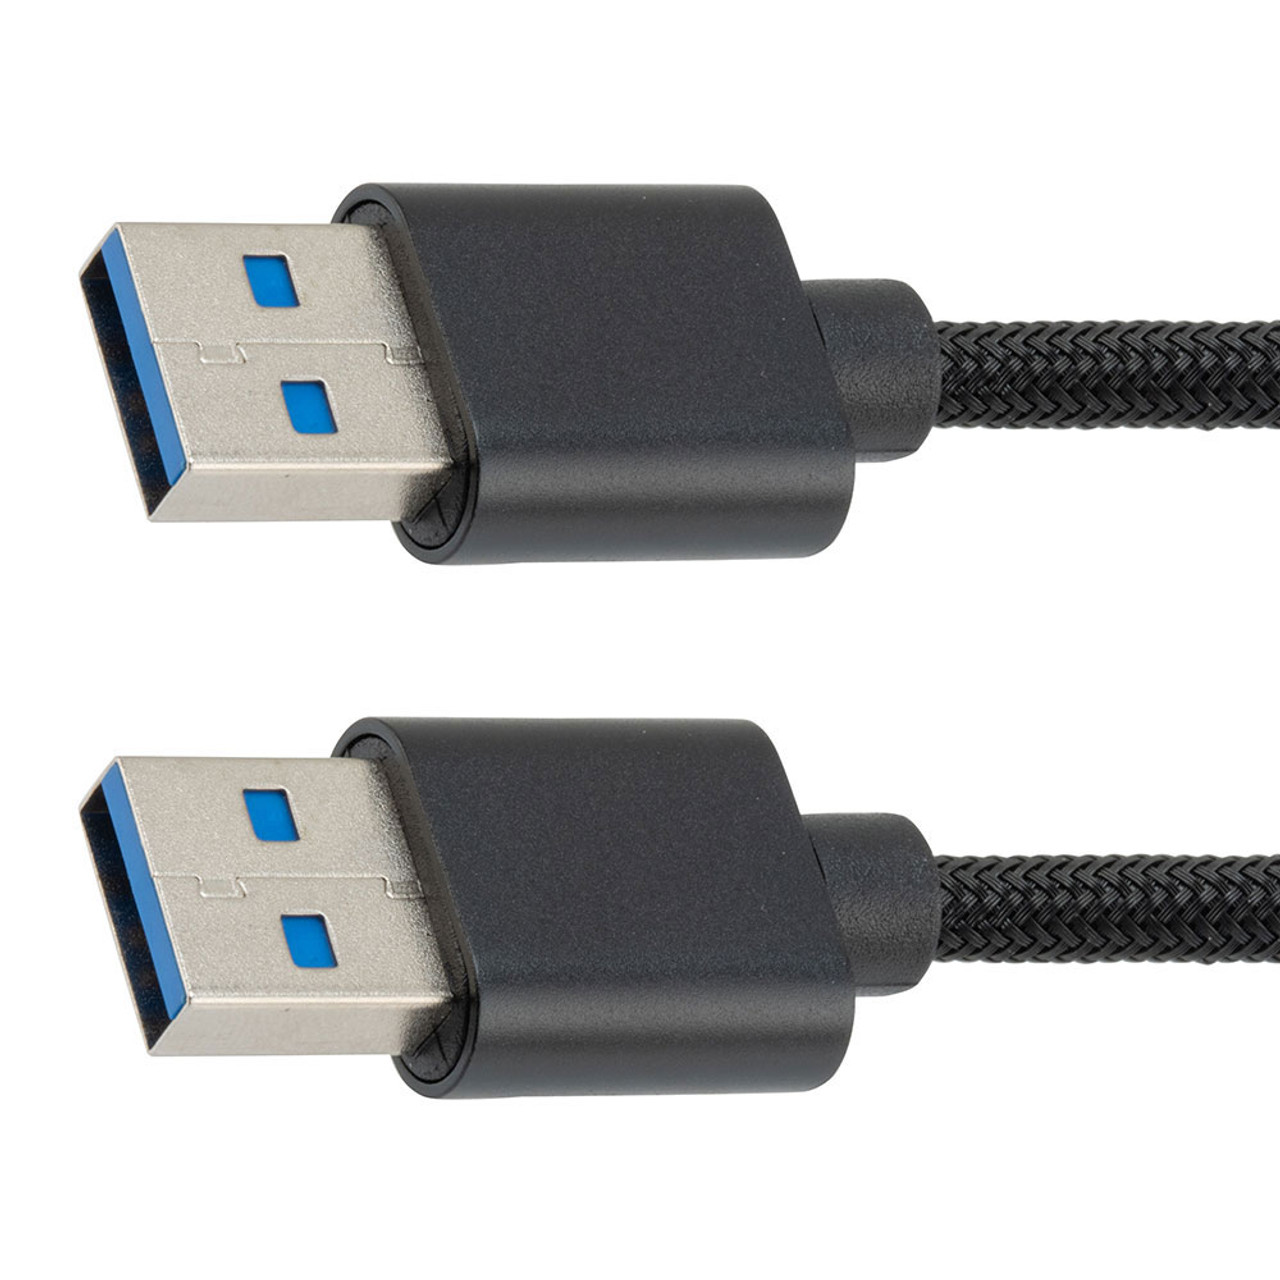 NavePoint USB A 3.0 Male to USB A 3.0 Male Cable, Aluminum Shell, Supports 5 Volts/2 Amps, 5 Gbps, Black Nylon Braid, 3M Length